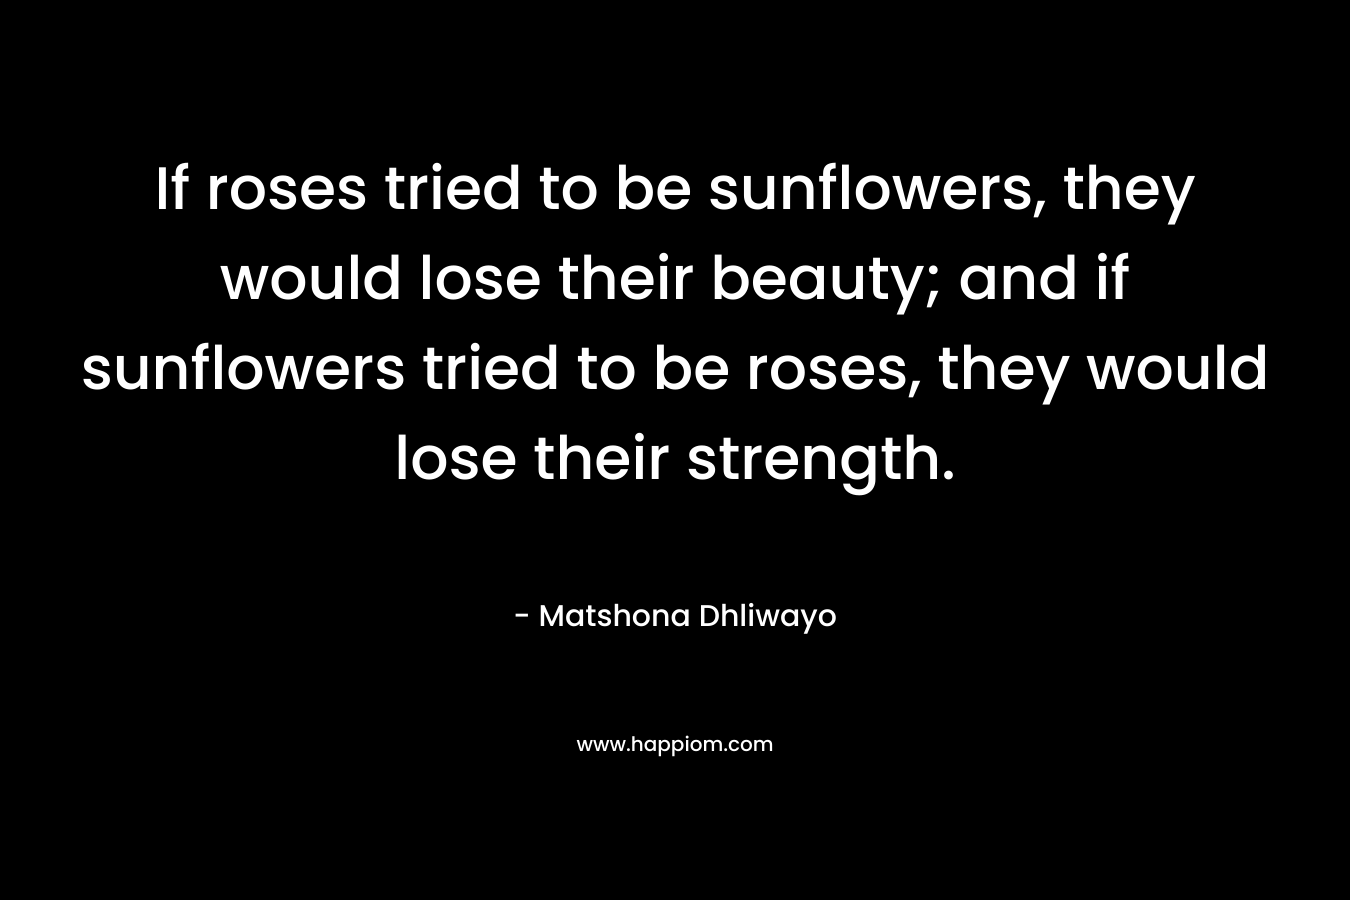 If roses tried to be sunflowers, they would lose their beauty; and if sunflowers tried to be roses, they would lose their strength.